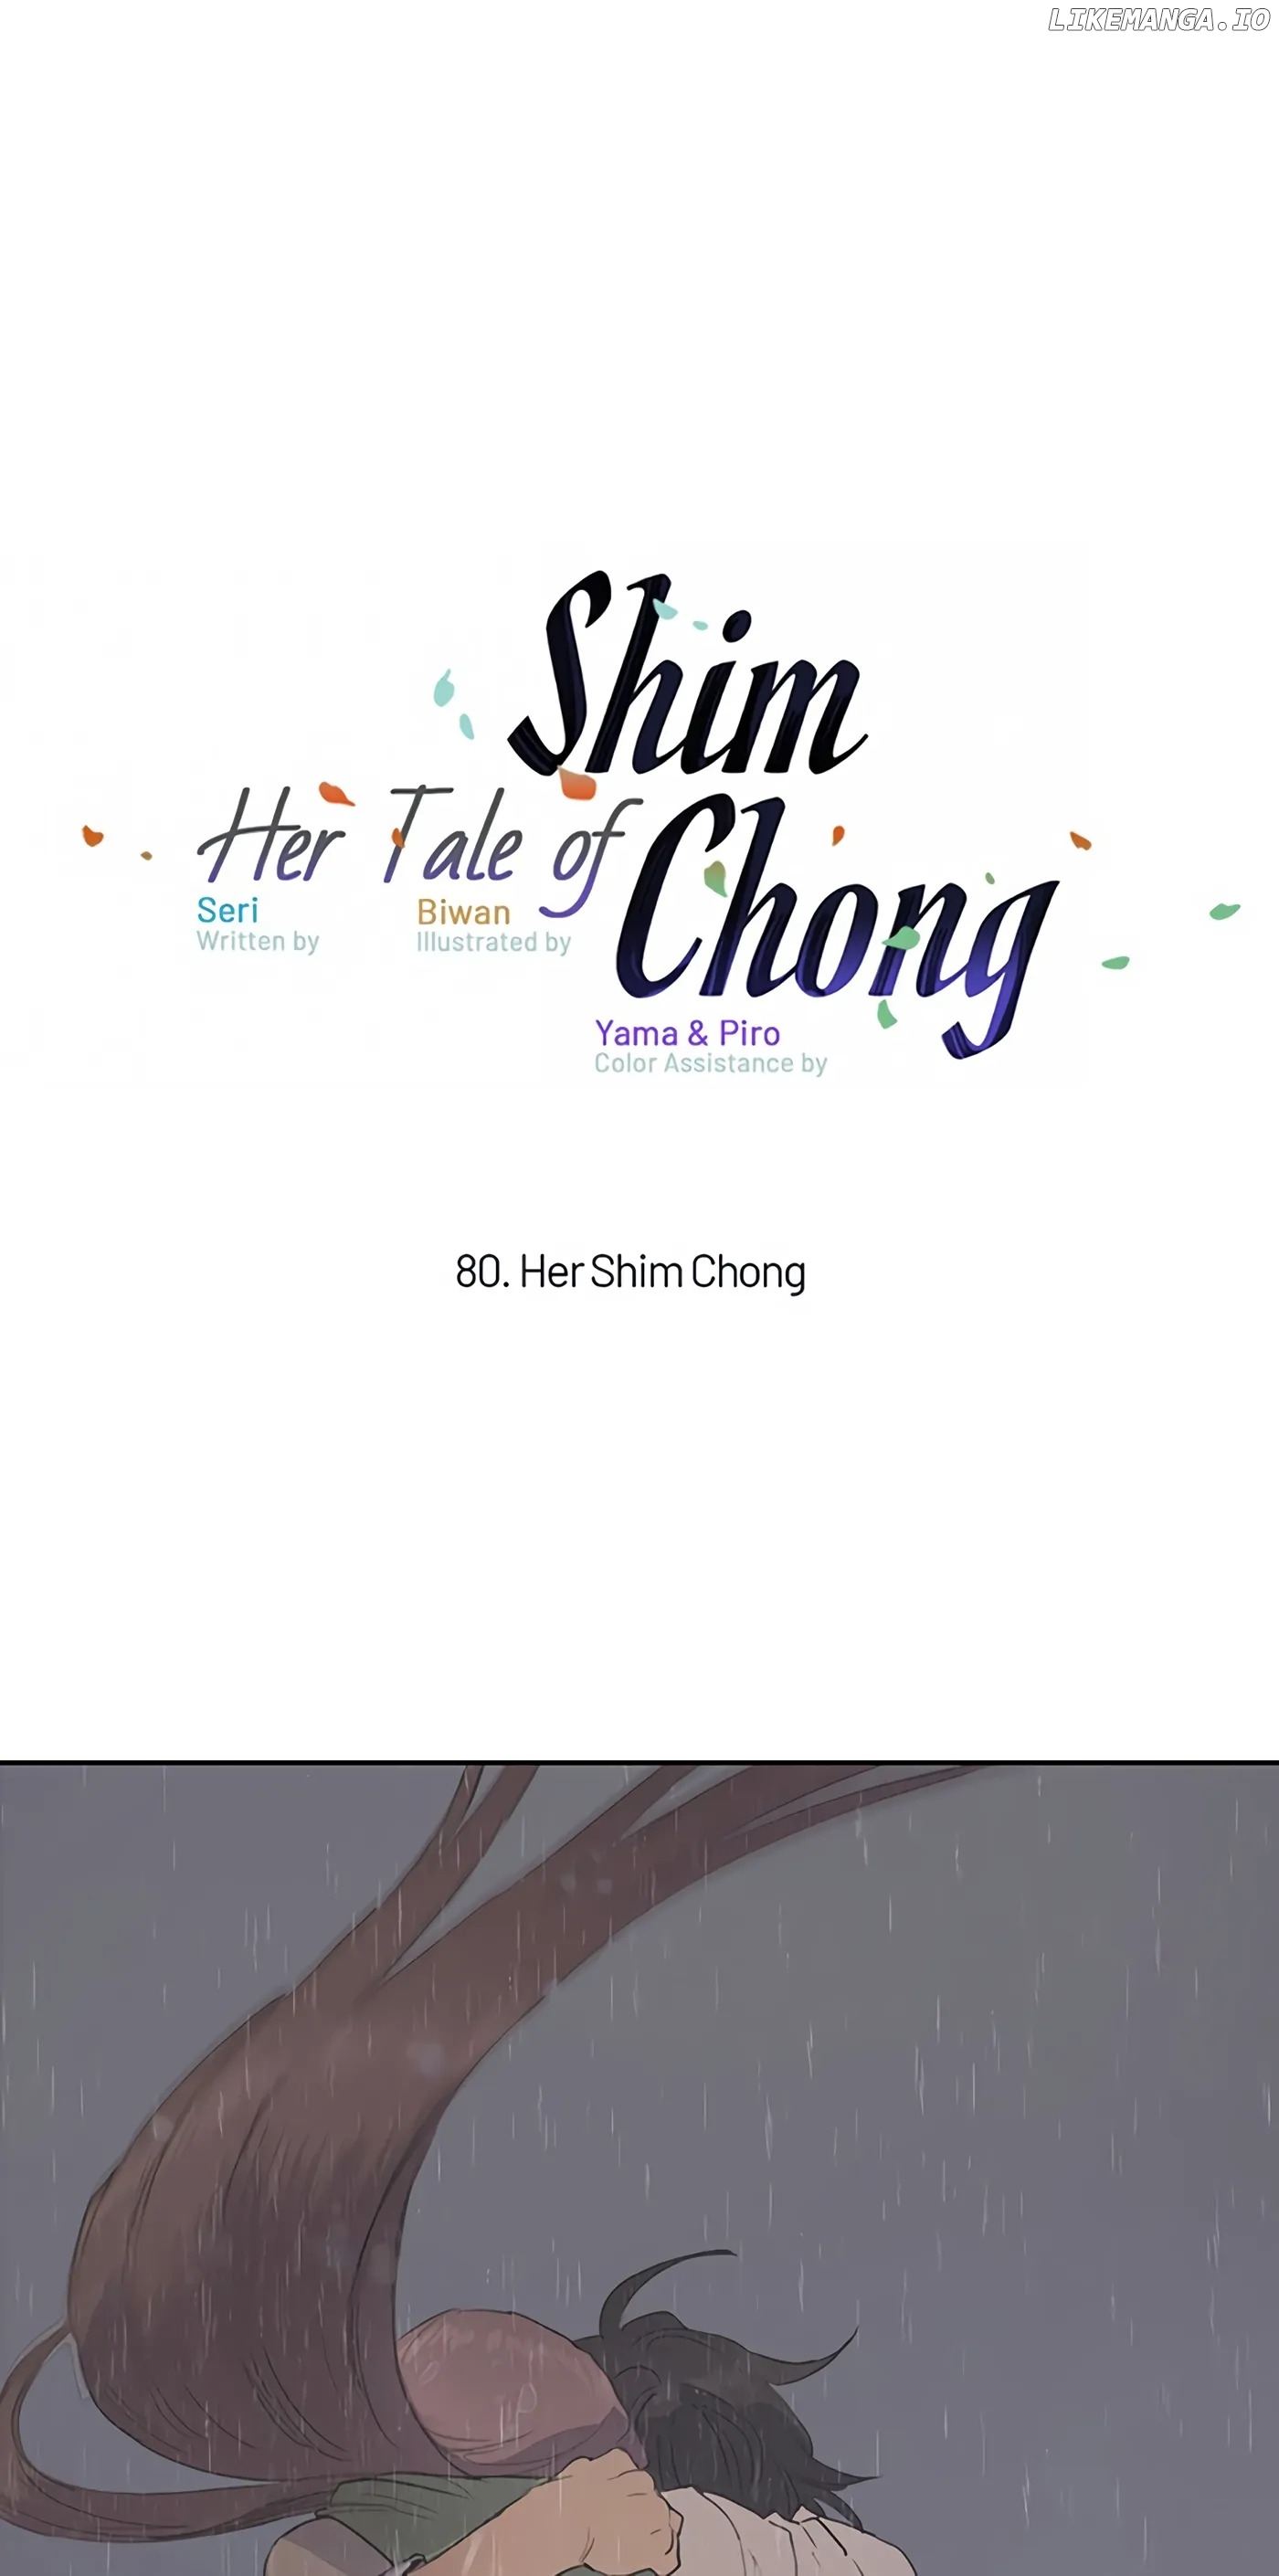 Her Tale of Shim Chong - chapter 80 - #1